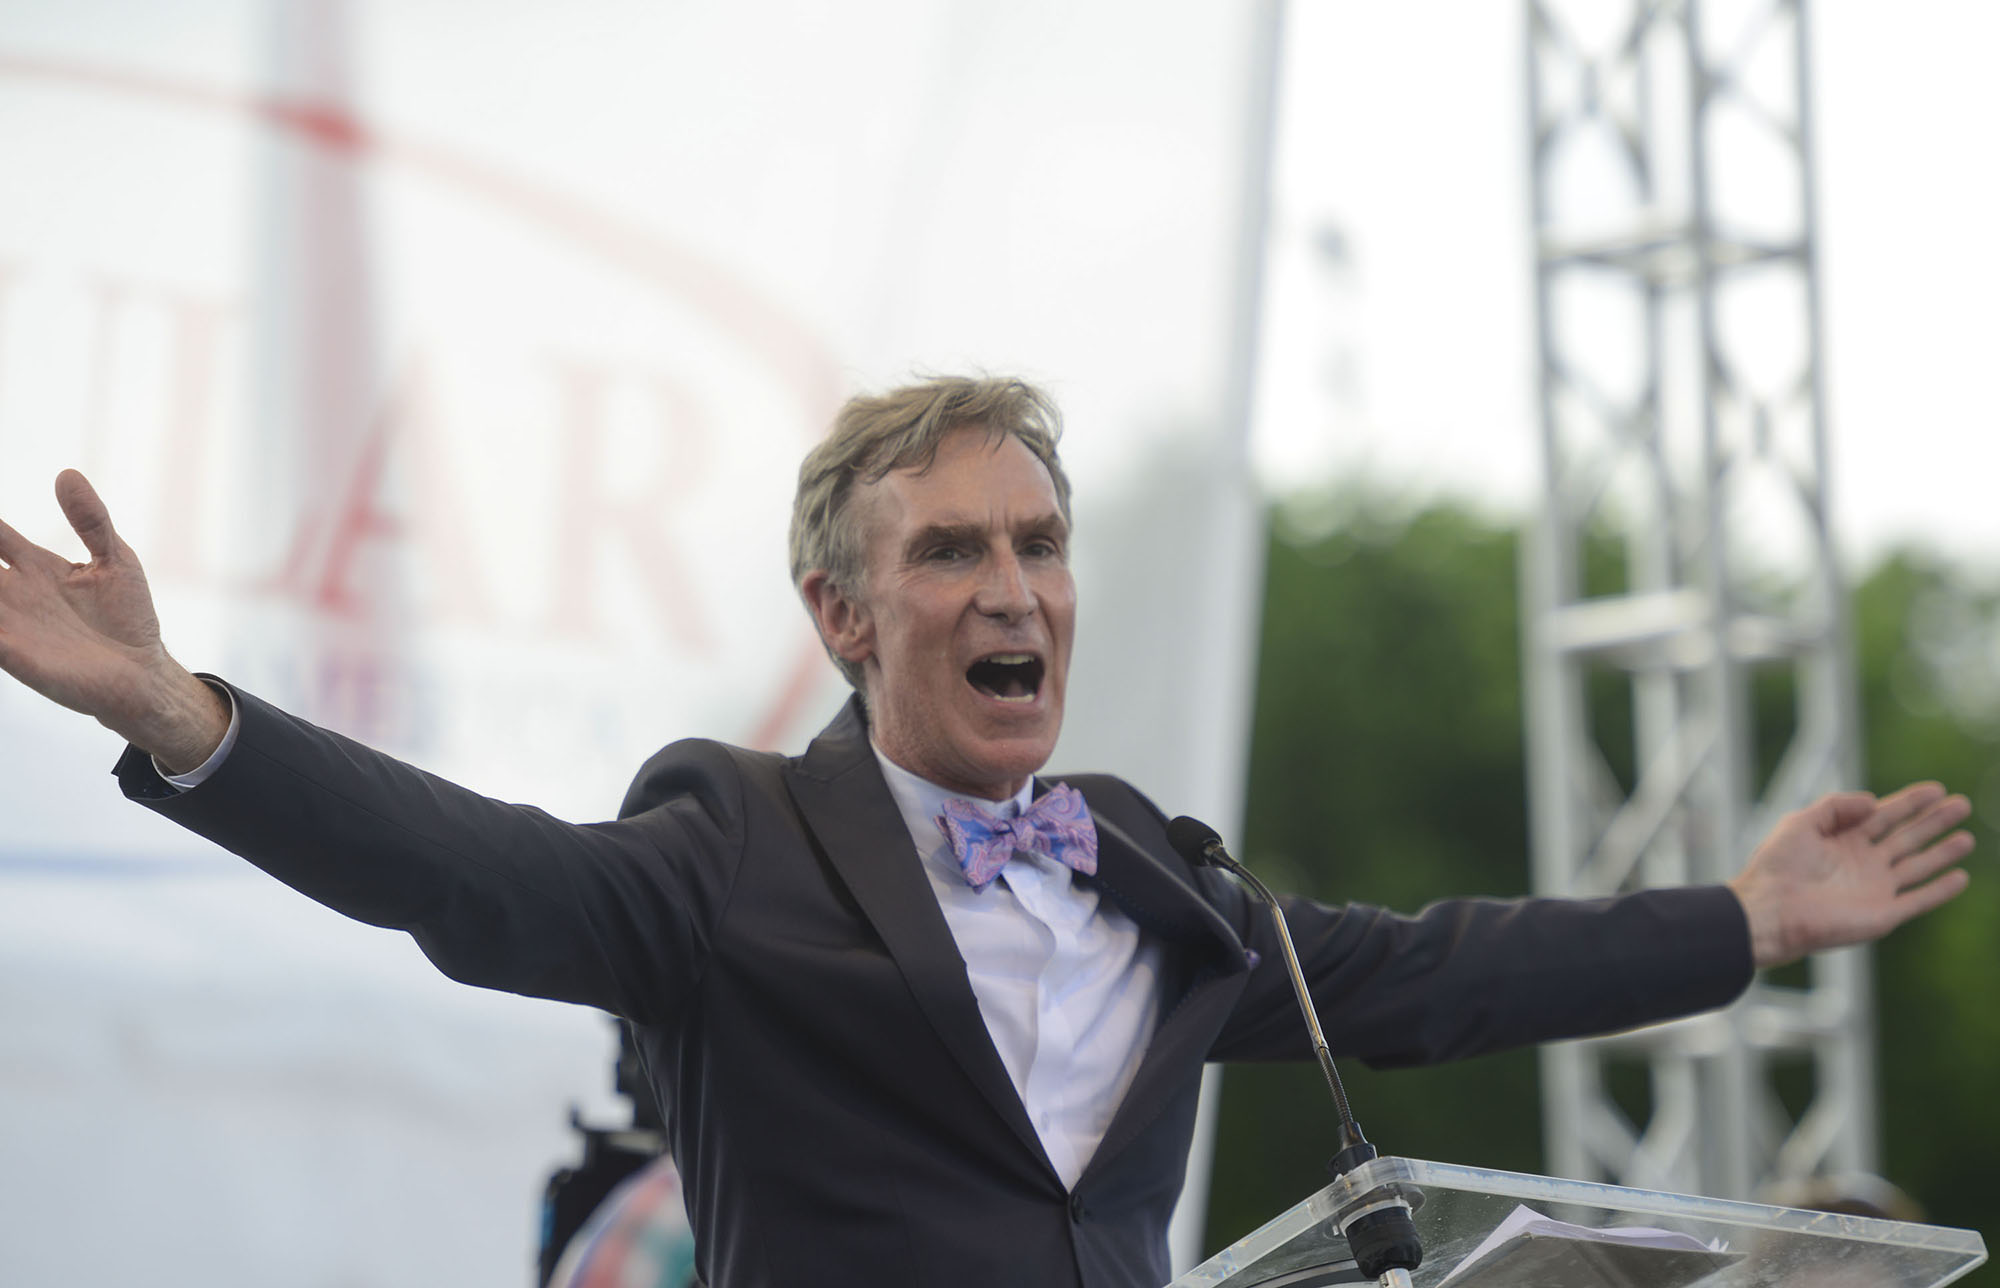 Bill Nye the Science Guy speaks at the Reason Rally 2016 at Lincoln Memorial on June 4, 2016 in Washington, DC.  (Photo by Riccardo S. Savi/Getty Images) (Riccardo S. Savi&mdash;Getty Images)